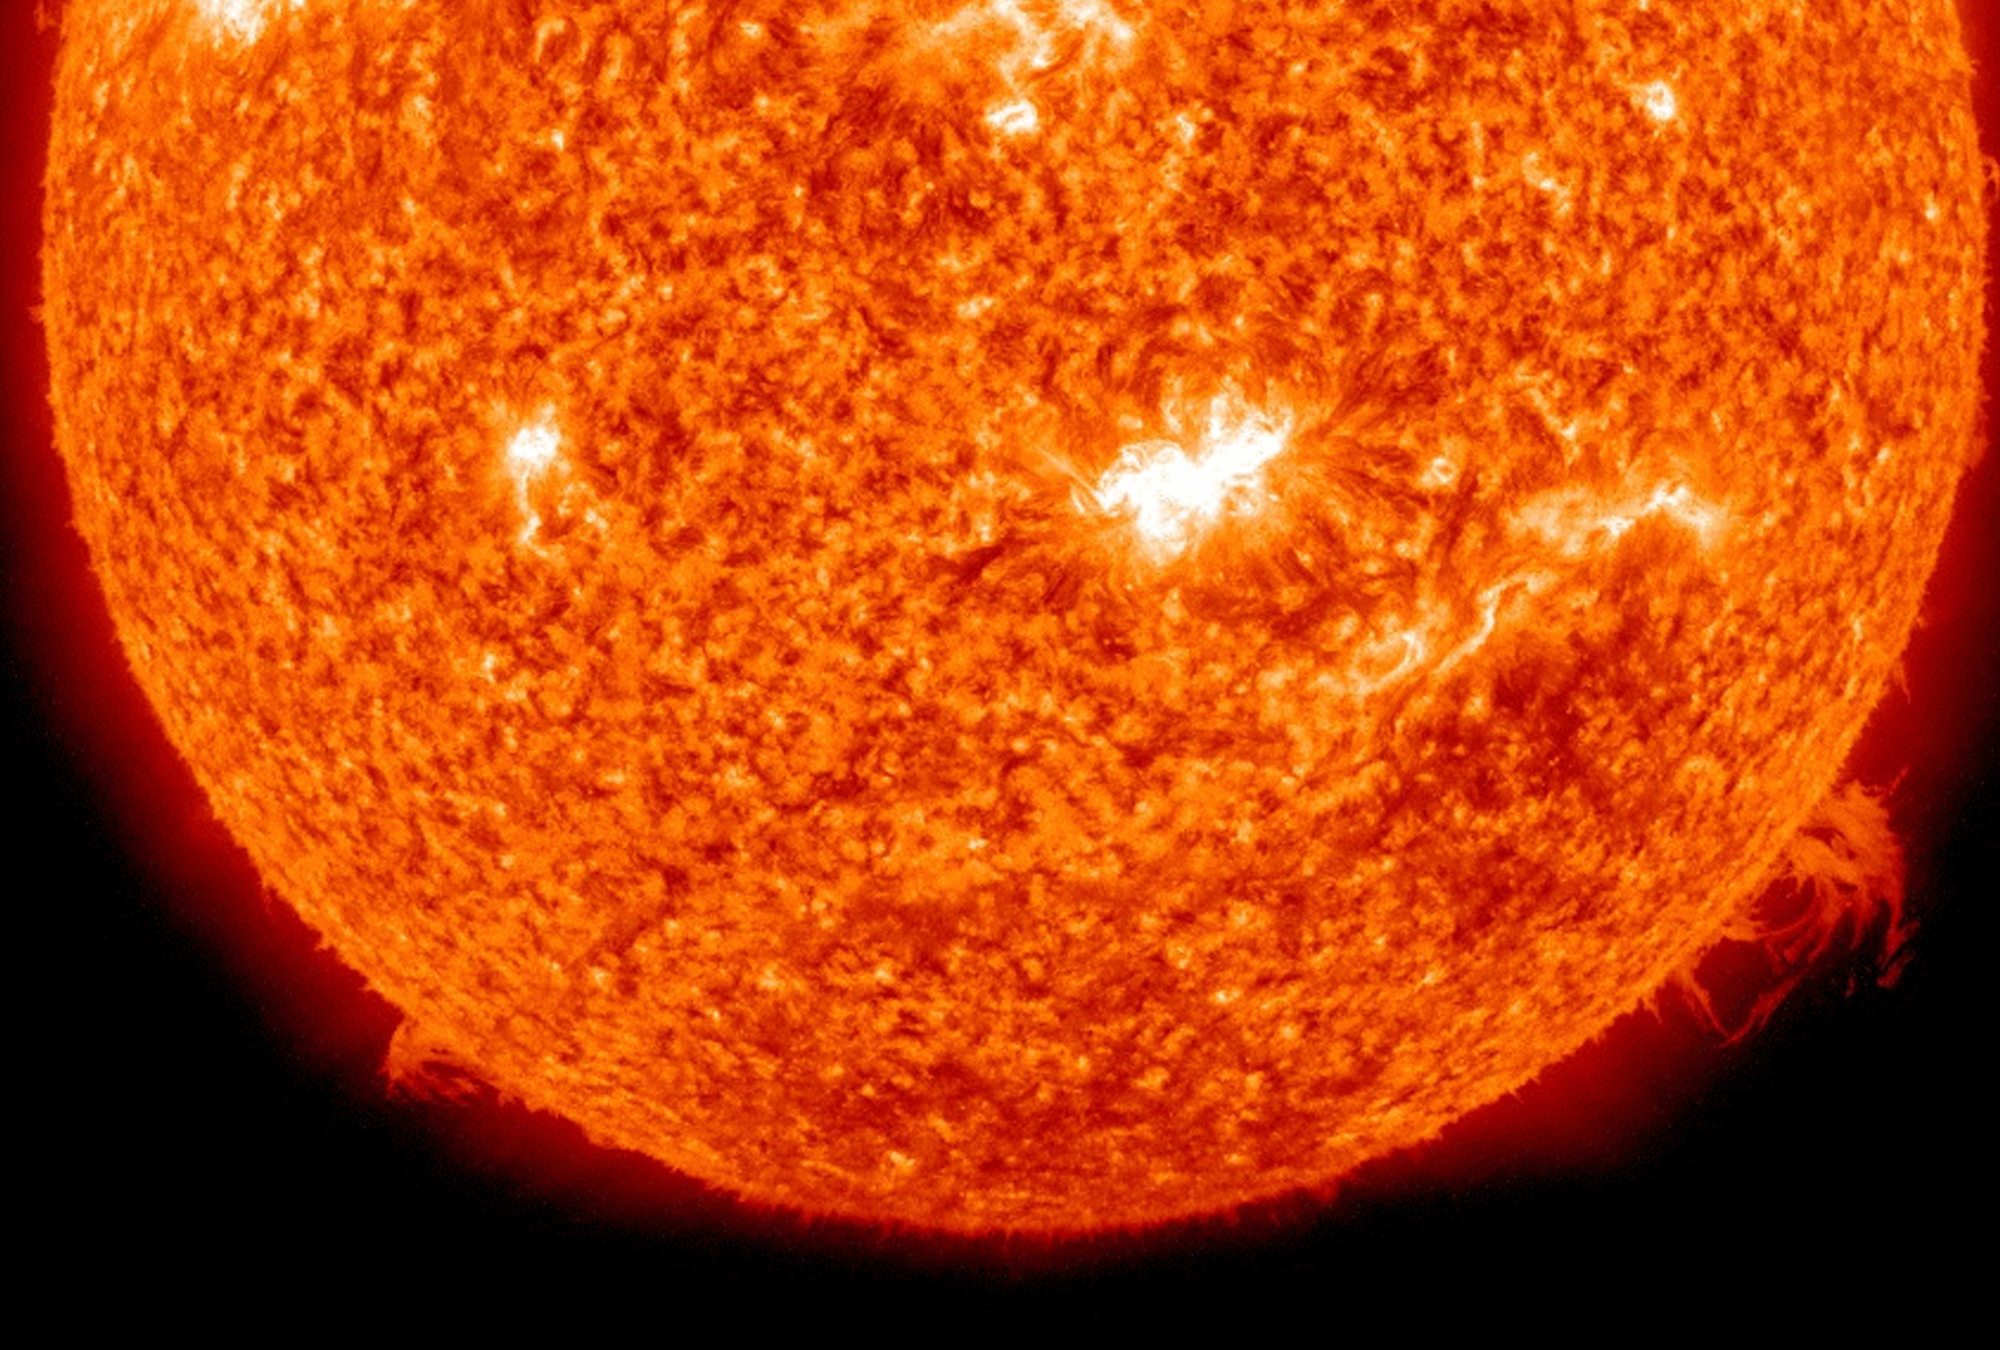 National Weather Service Monitoring ‘Significant’ Solar Flares webfi